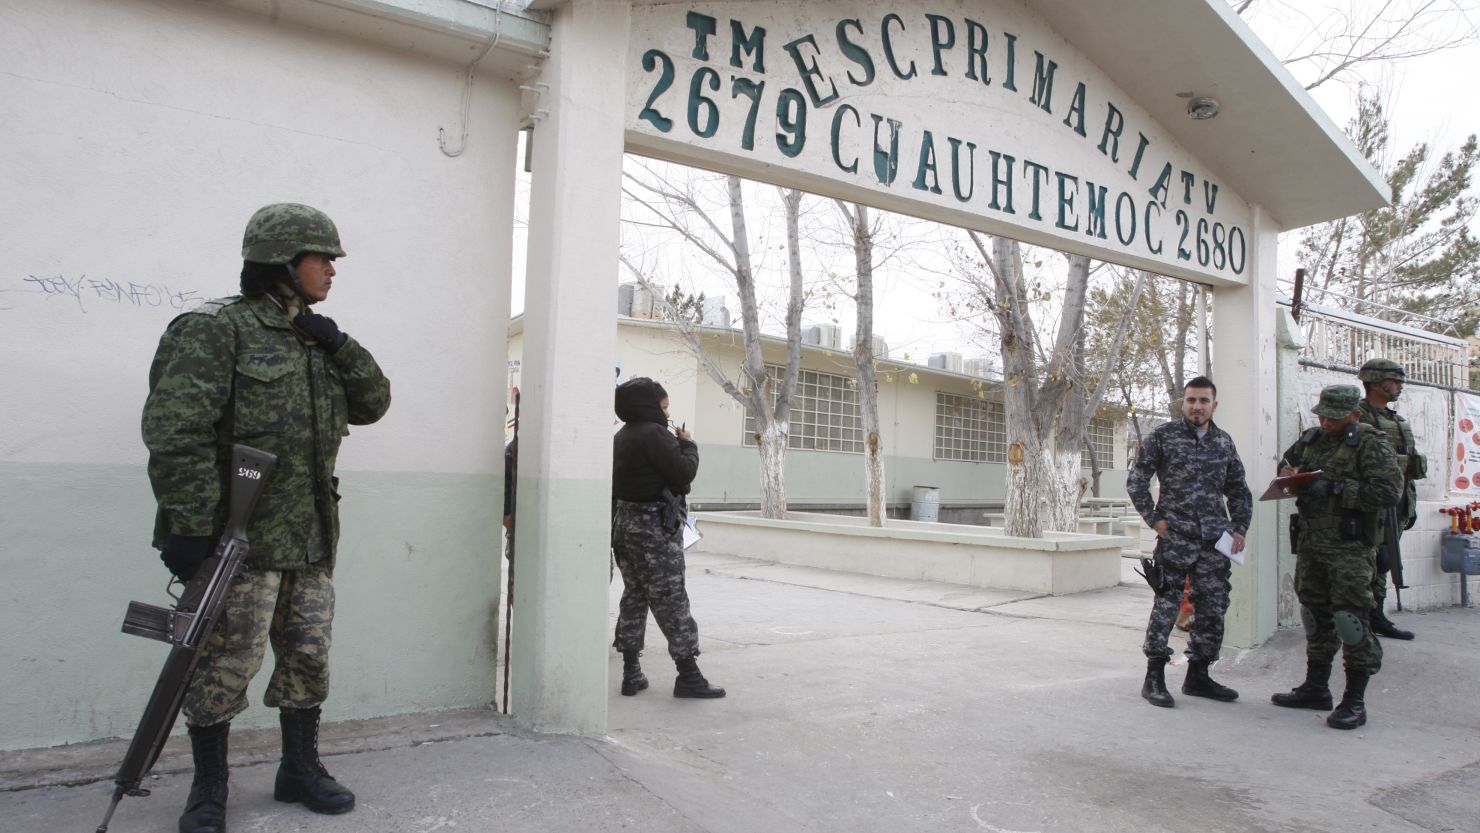 Security forces in Ciudad Juarez, Mexico, respond to a shooting at an elementary school that left one man dead.